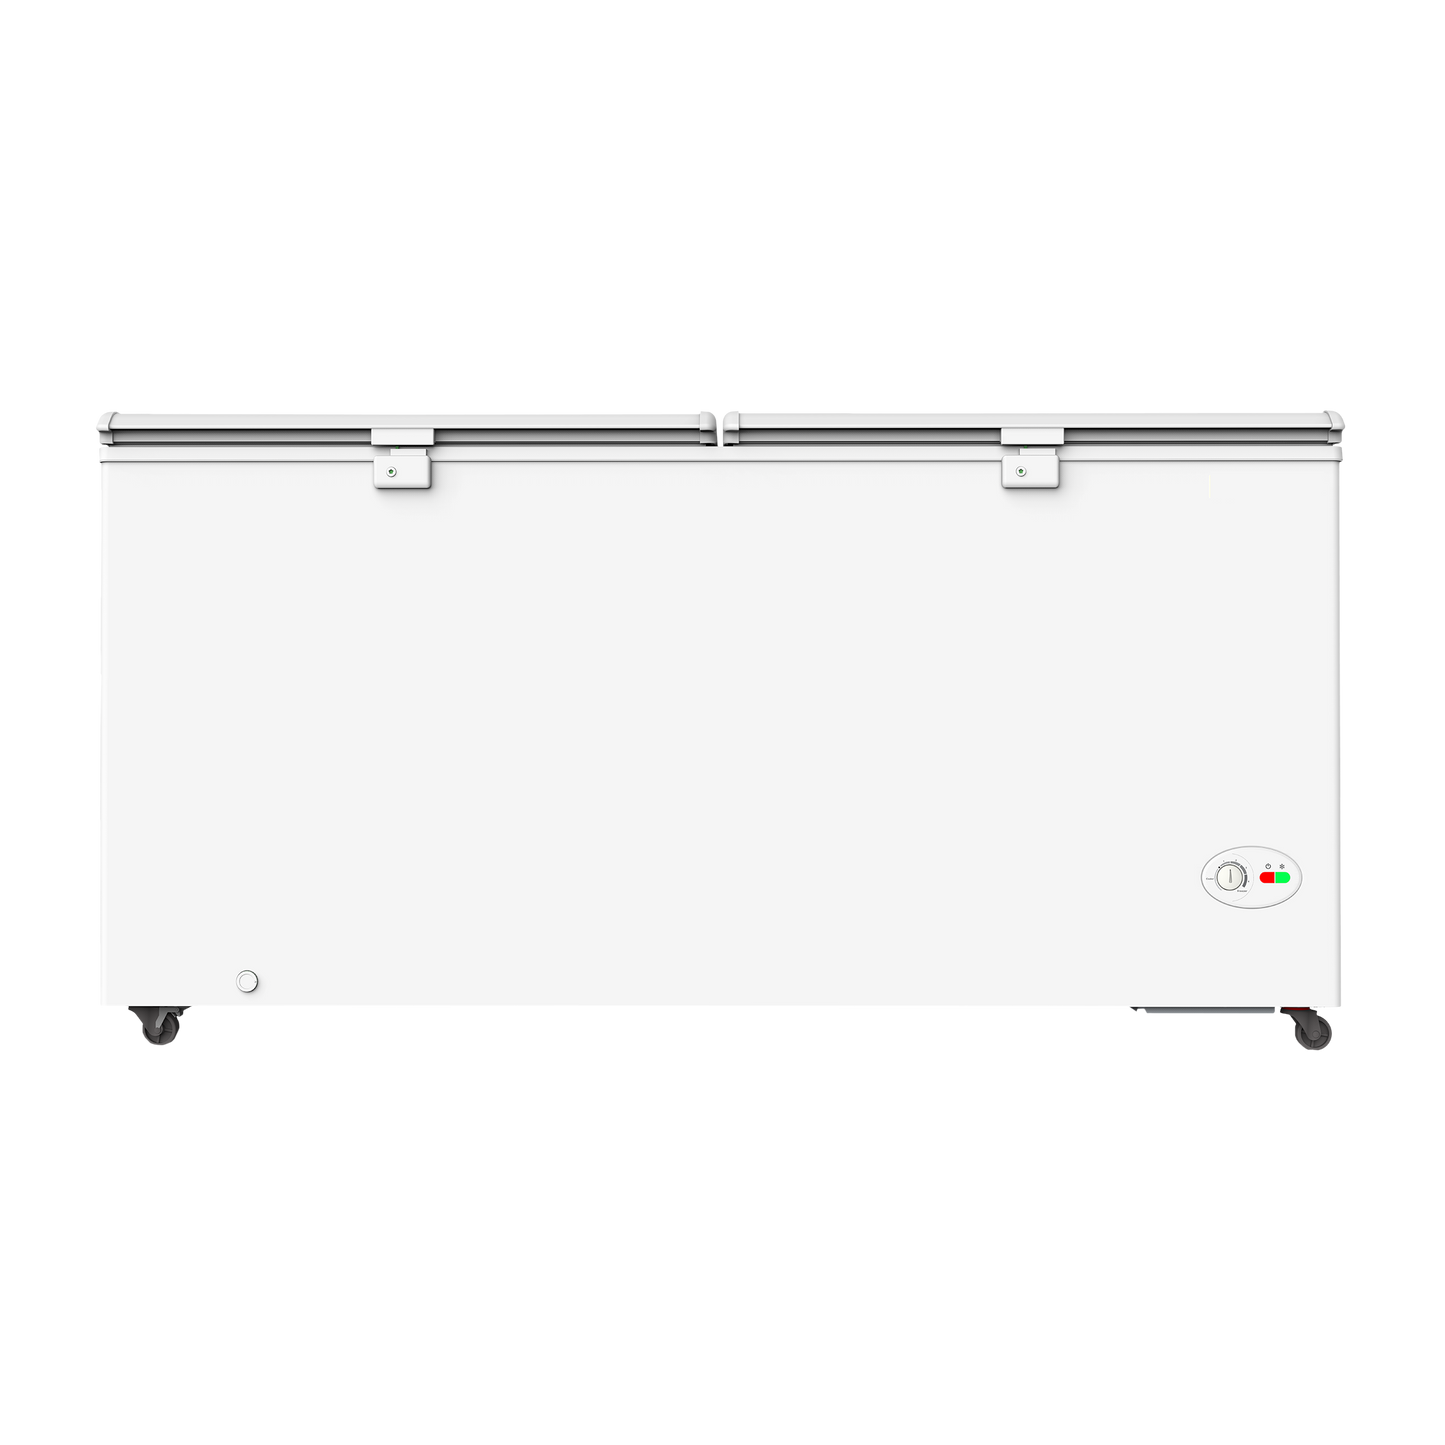 Emtex 515 Litres Double Door Chest Freezer (Direct Cooling Technology, CF575NEYW, White)